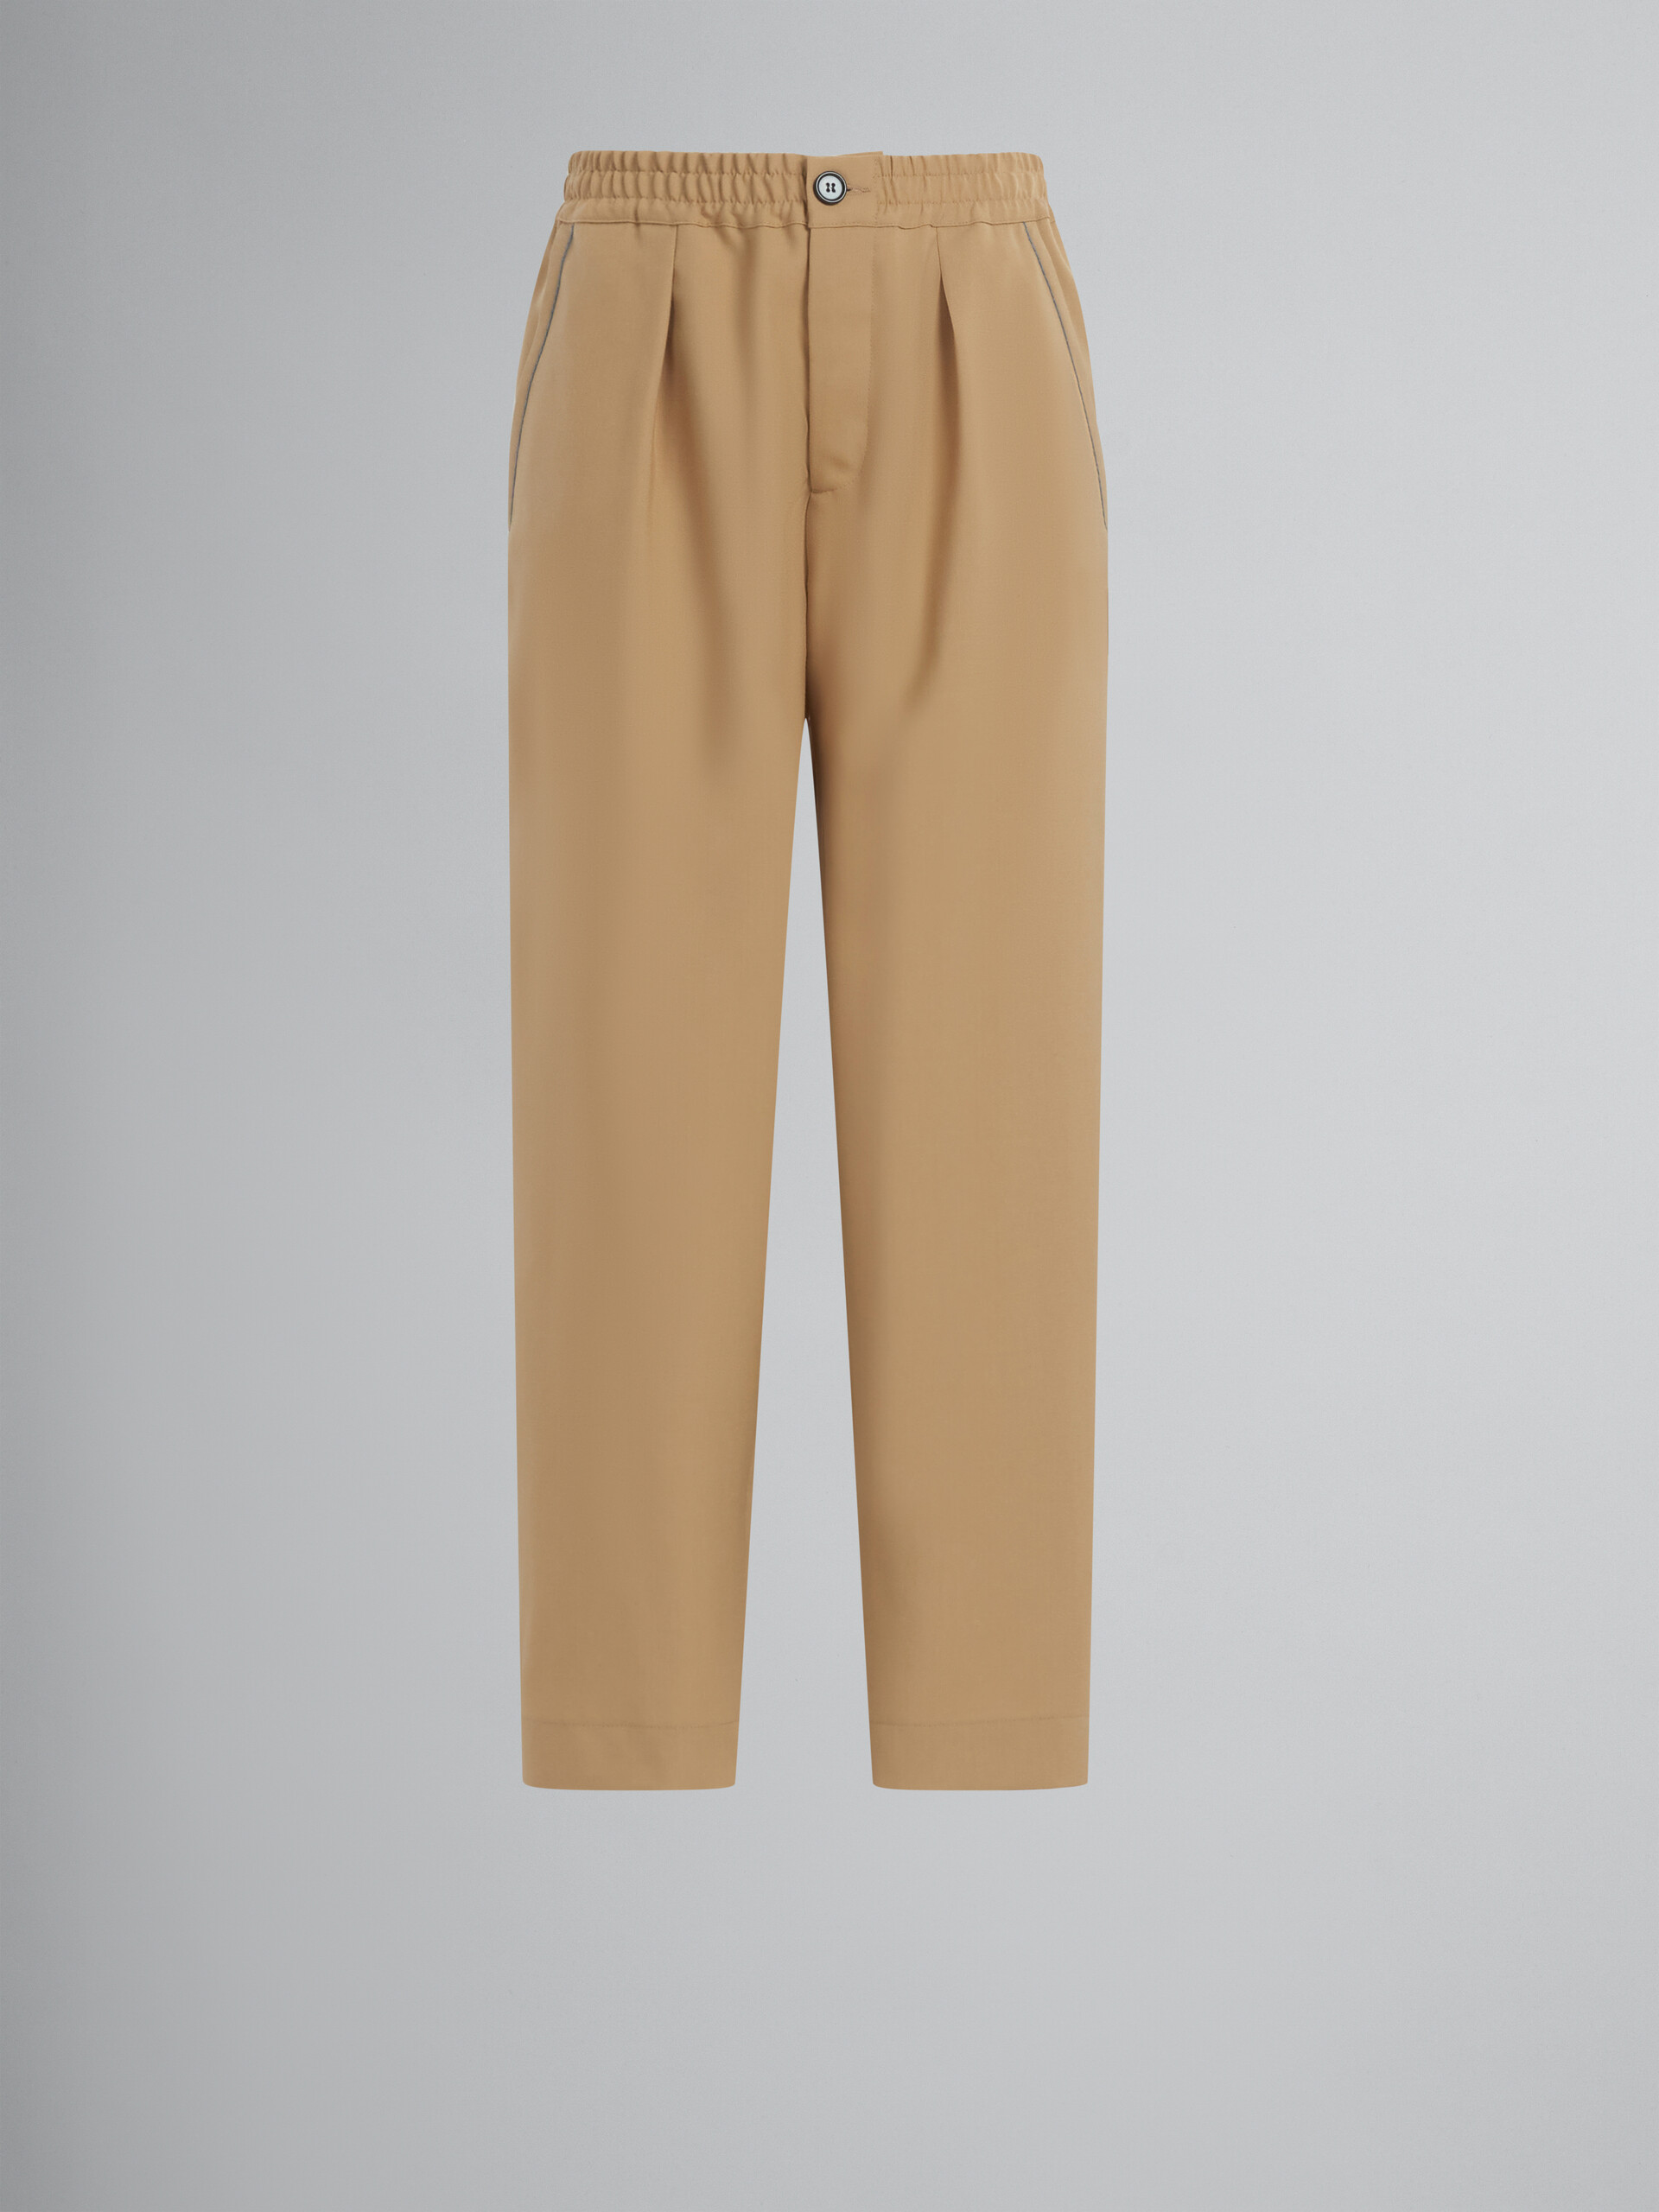 Cropped trousers in blue tropical wool - Pants - Image 1